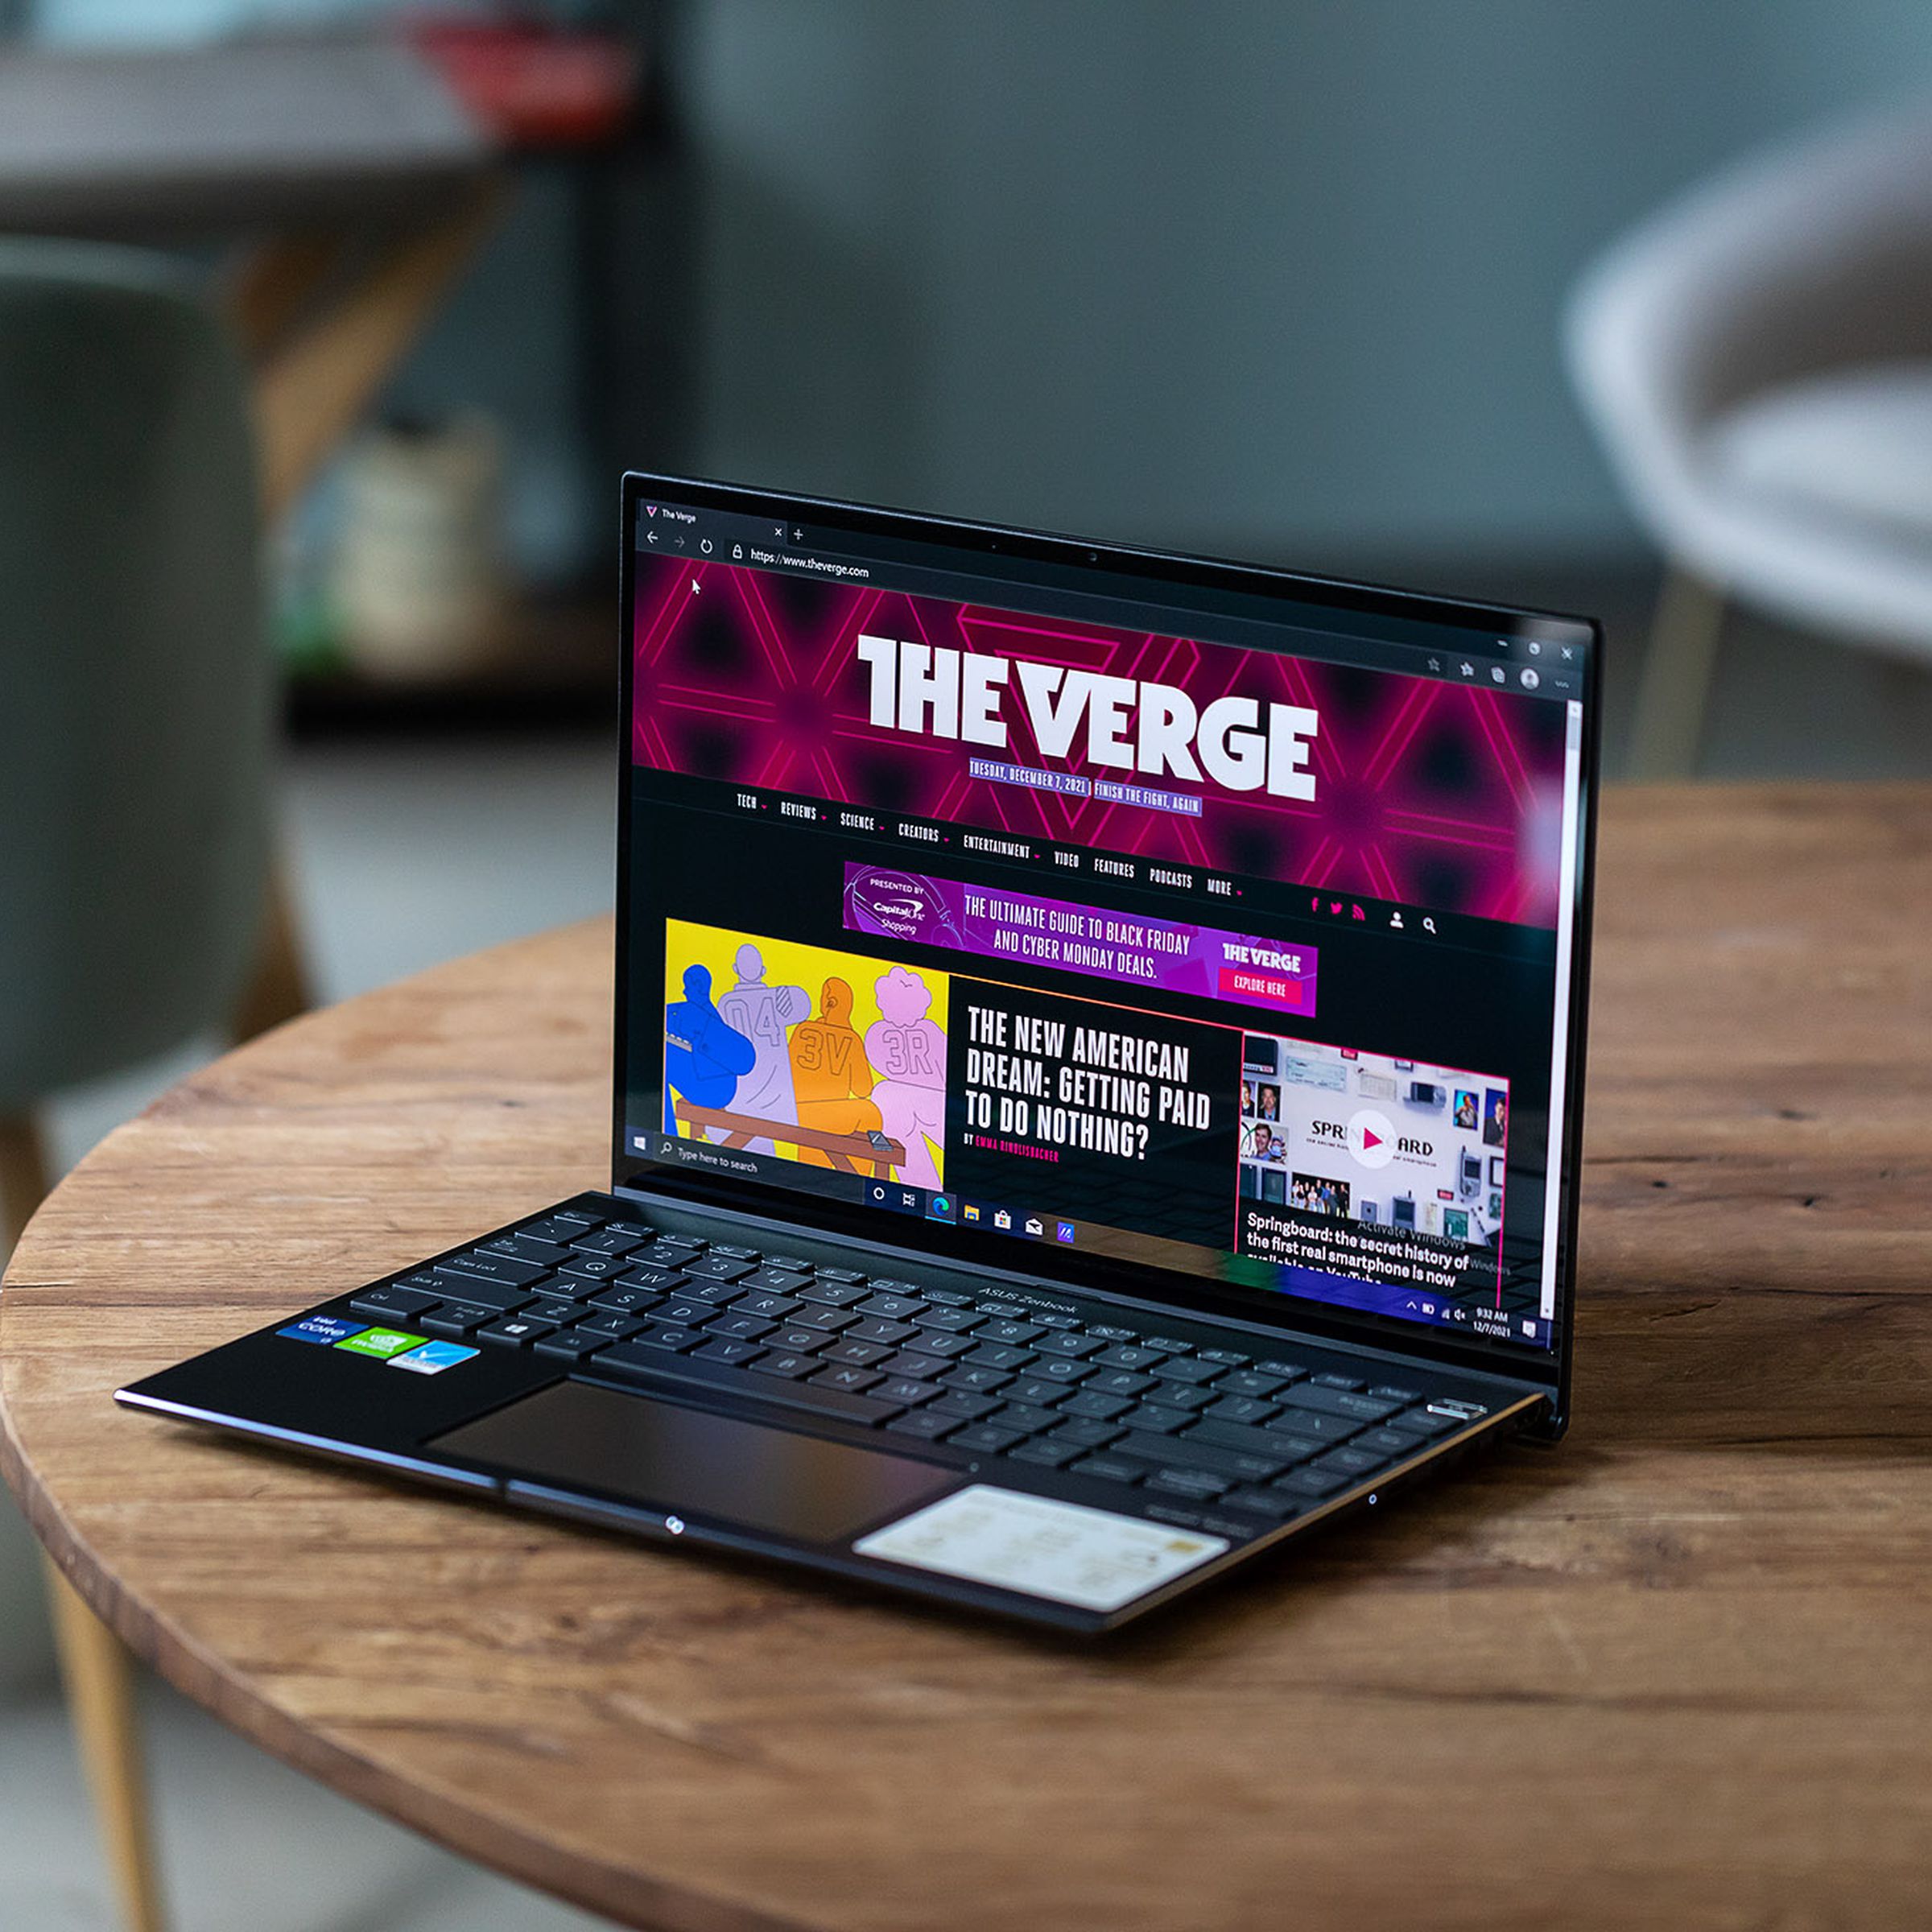 The Zenbook 14X OLED on a wooden table angled to the left. The screen displays The Verge homepage.